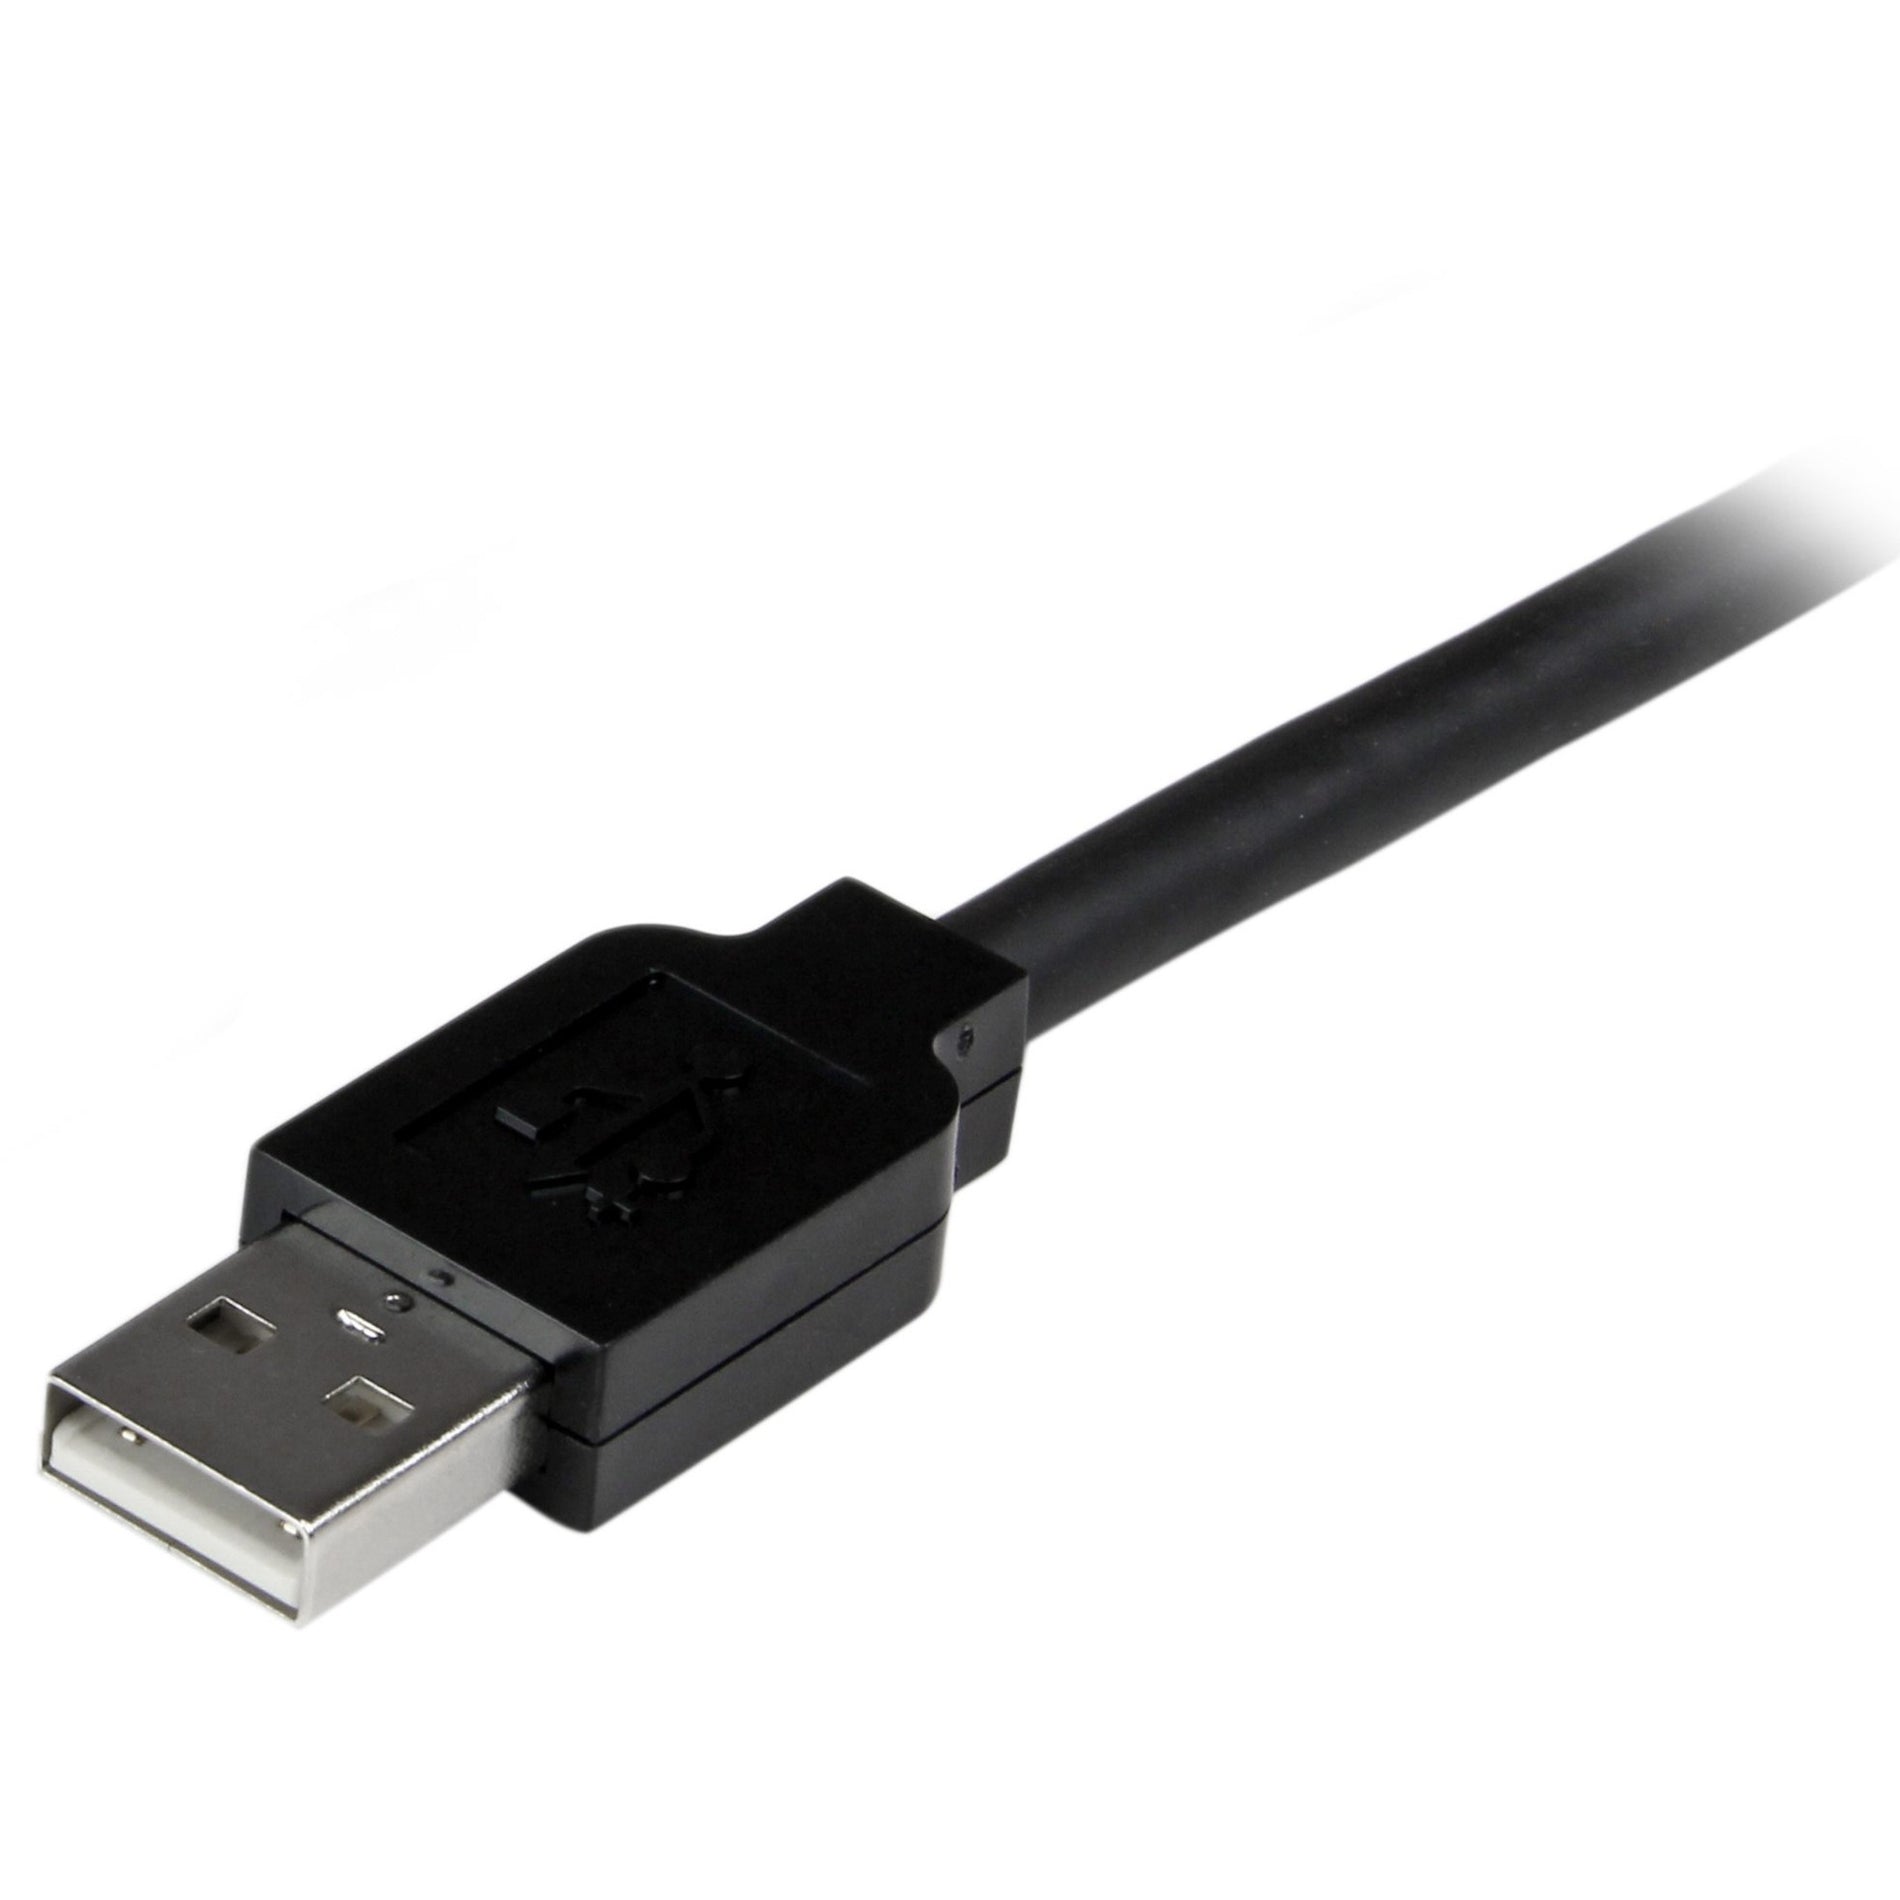 StarTech.com USB2AAEXT20M 20m USB 2.0 Active Extension Cable - M/F, 65.62 ft Data Transfer Cable, Charging, 480 Mbit/s